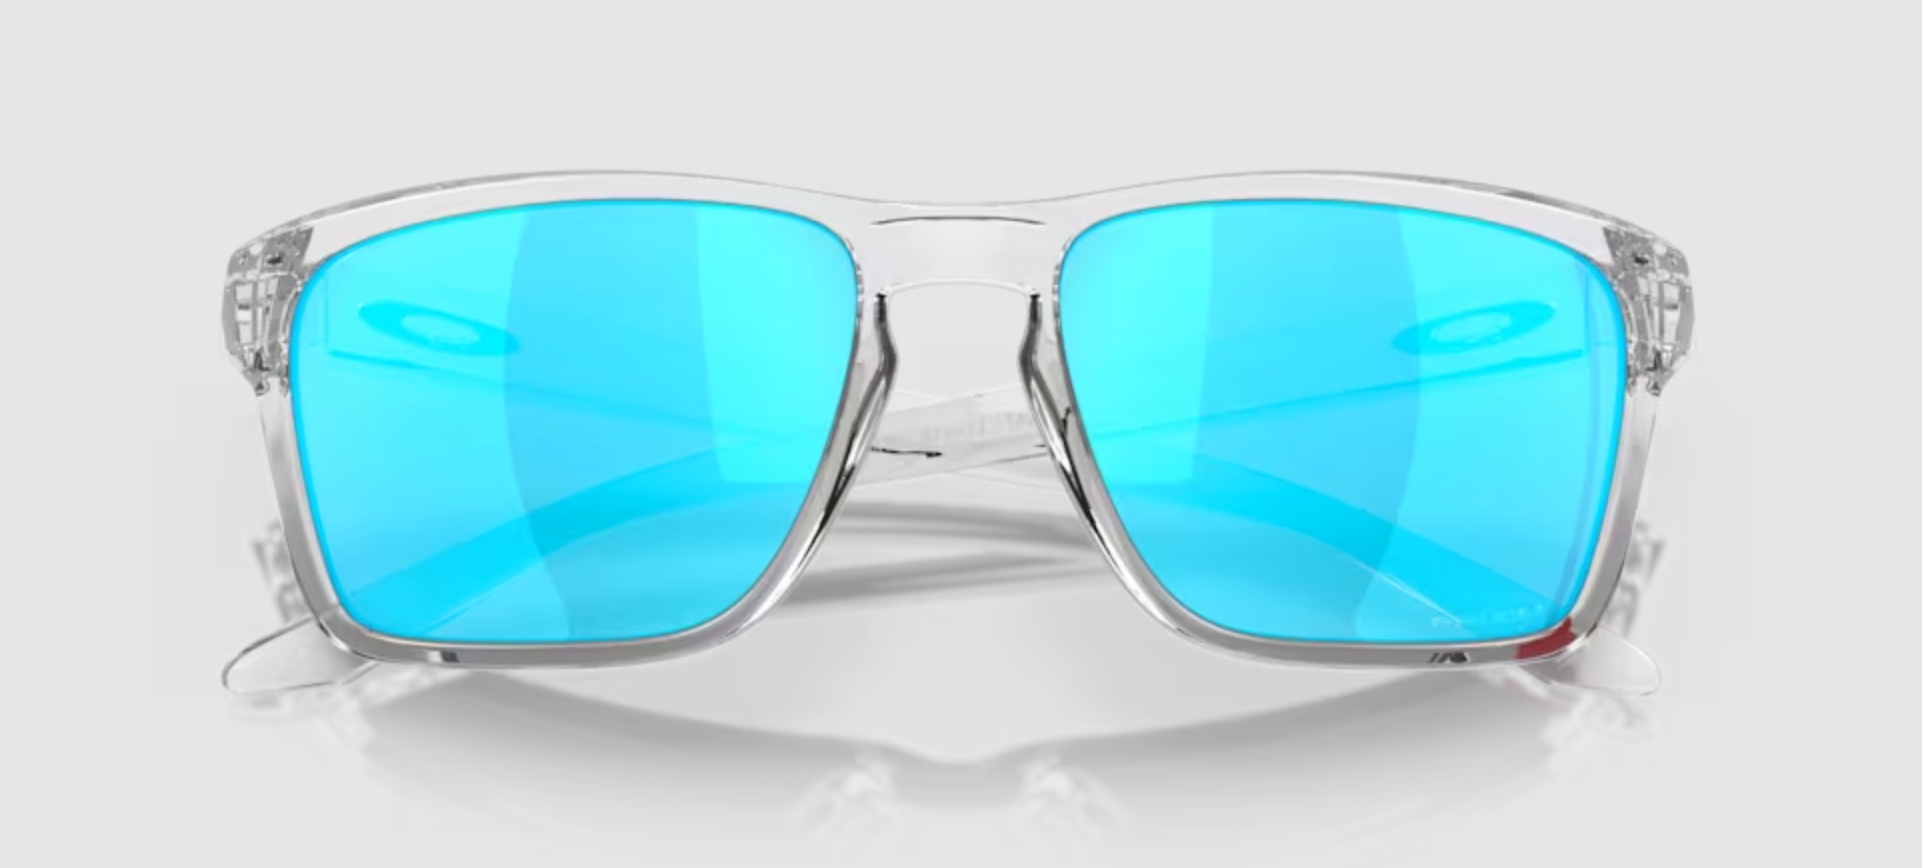 Oakley Sylas Clear Frame with Blue Lens